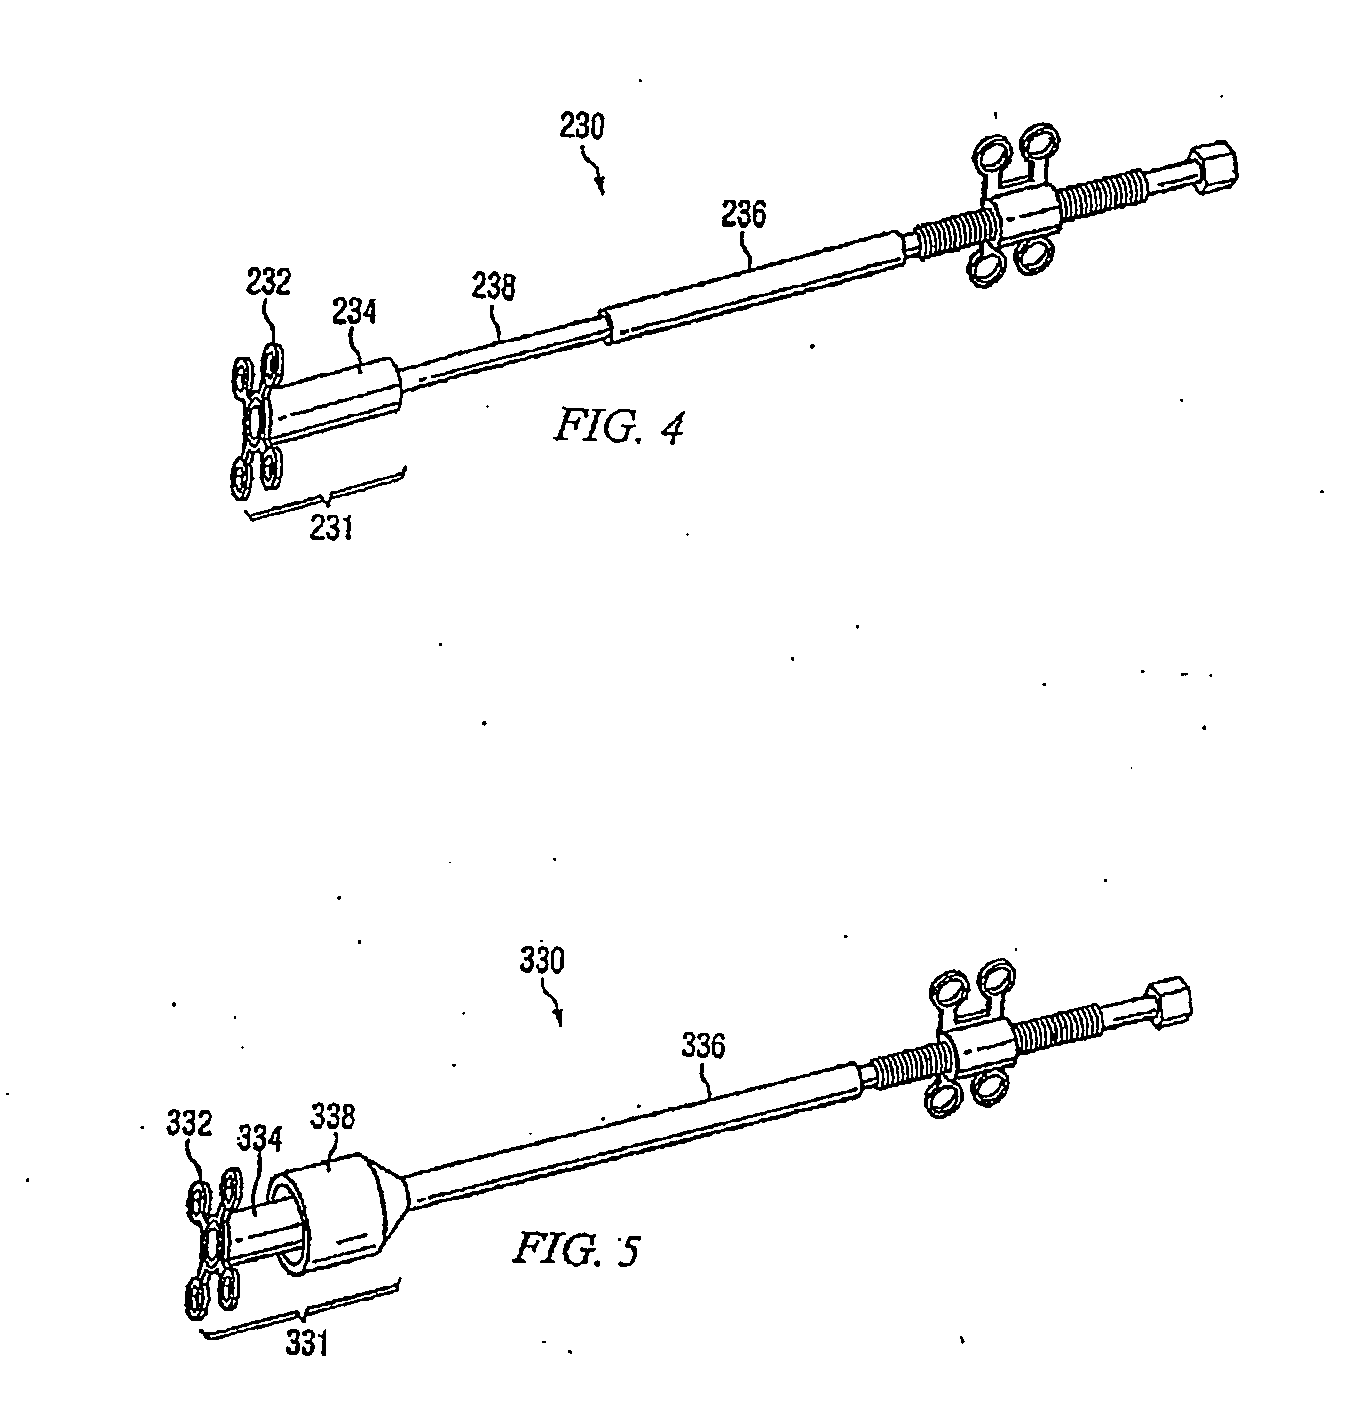 Method and System for Facial Osteodistraction Using a Cannulated Device